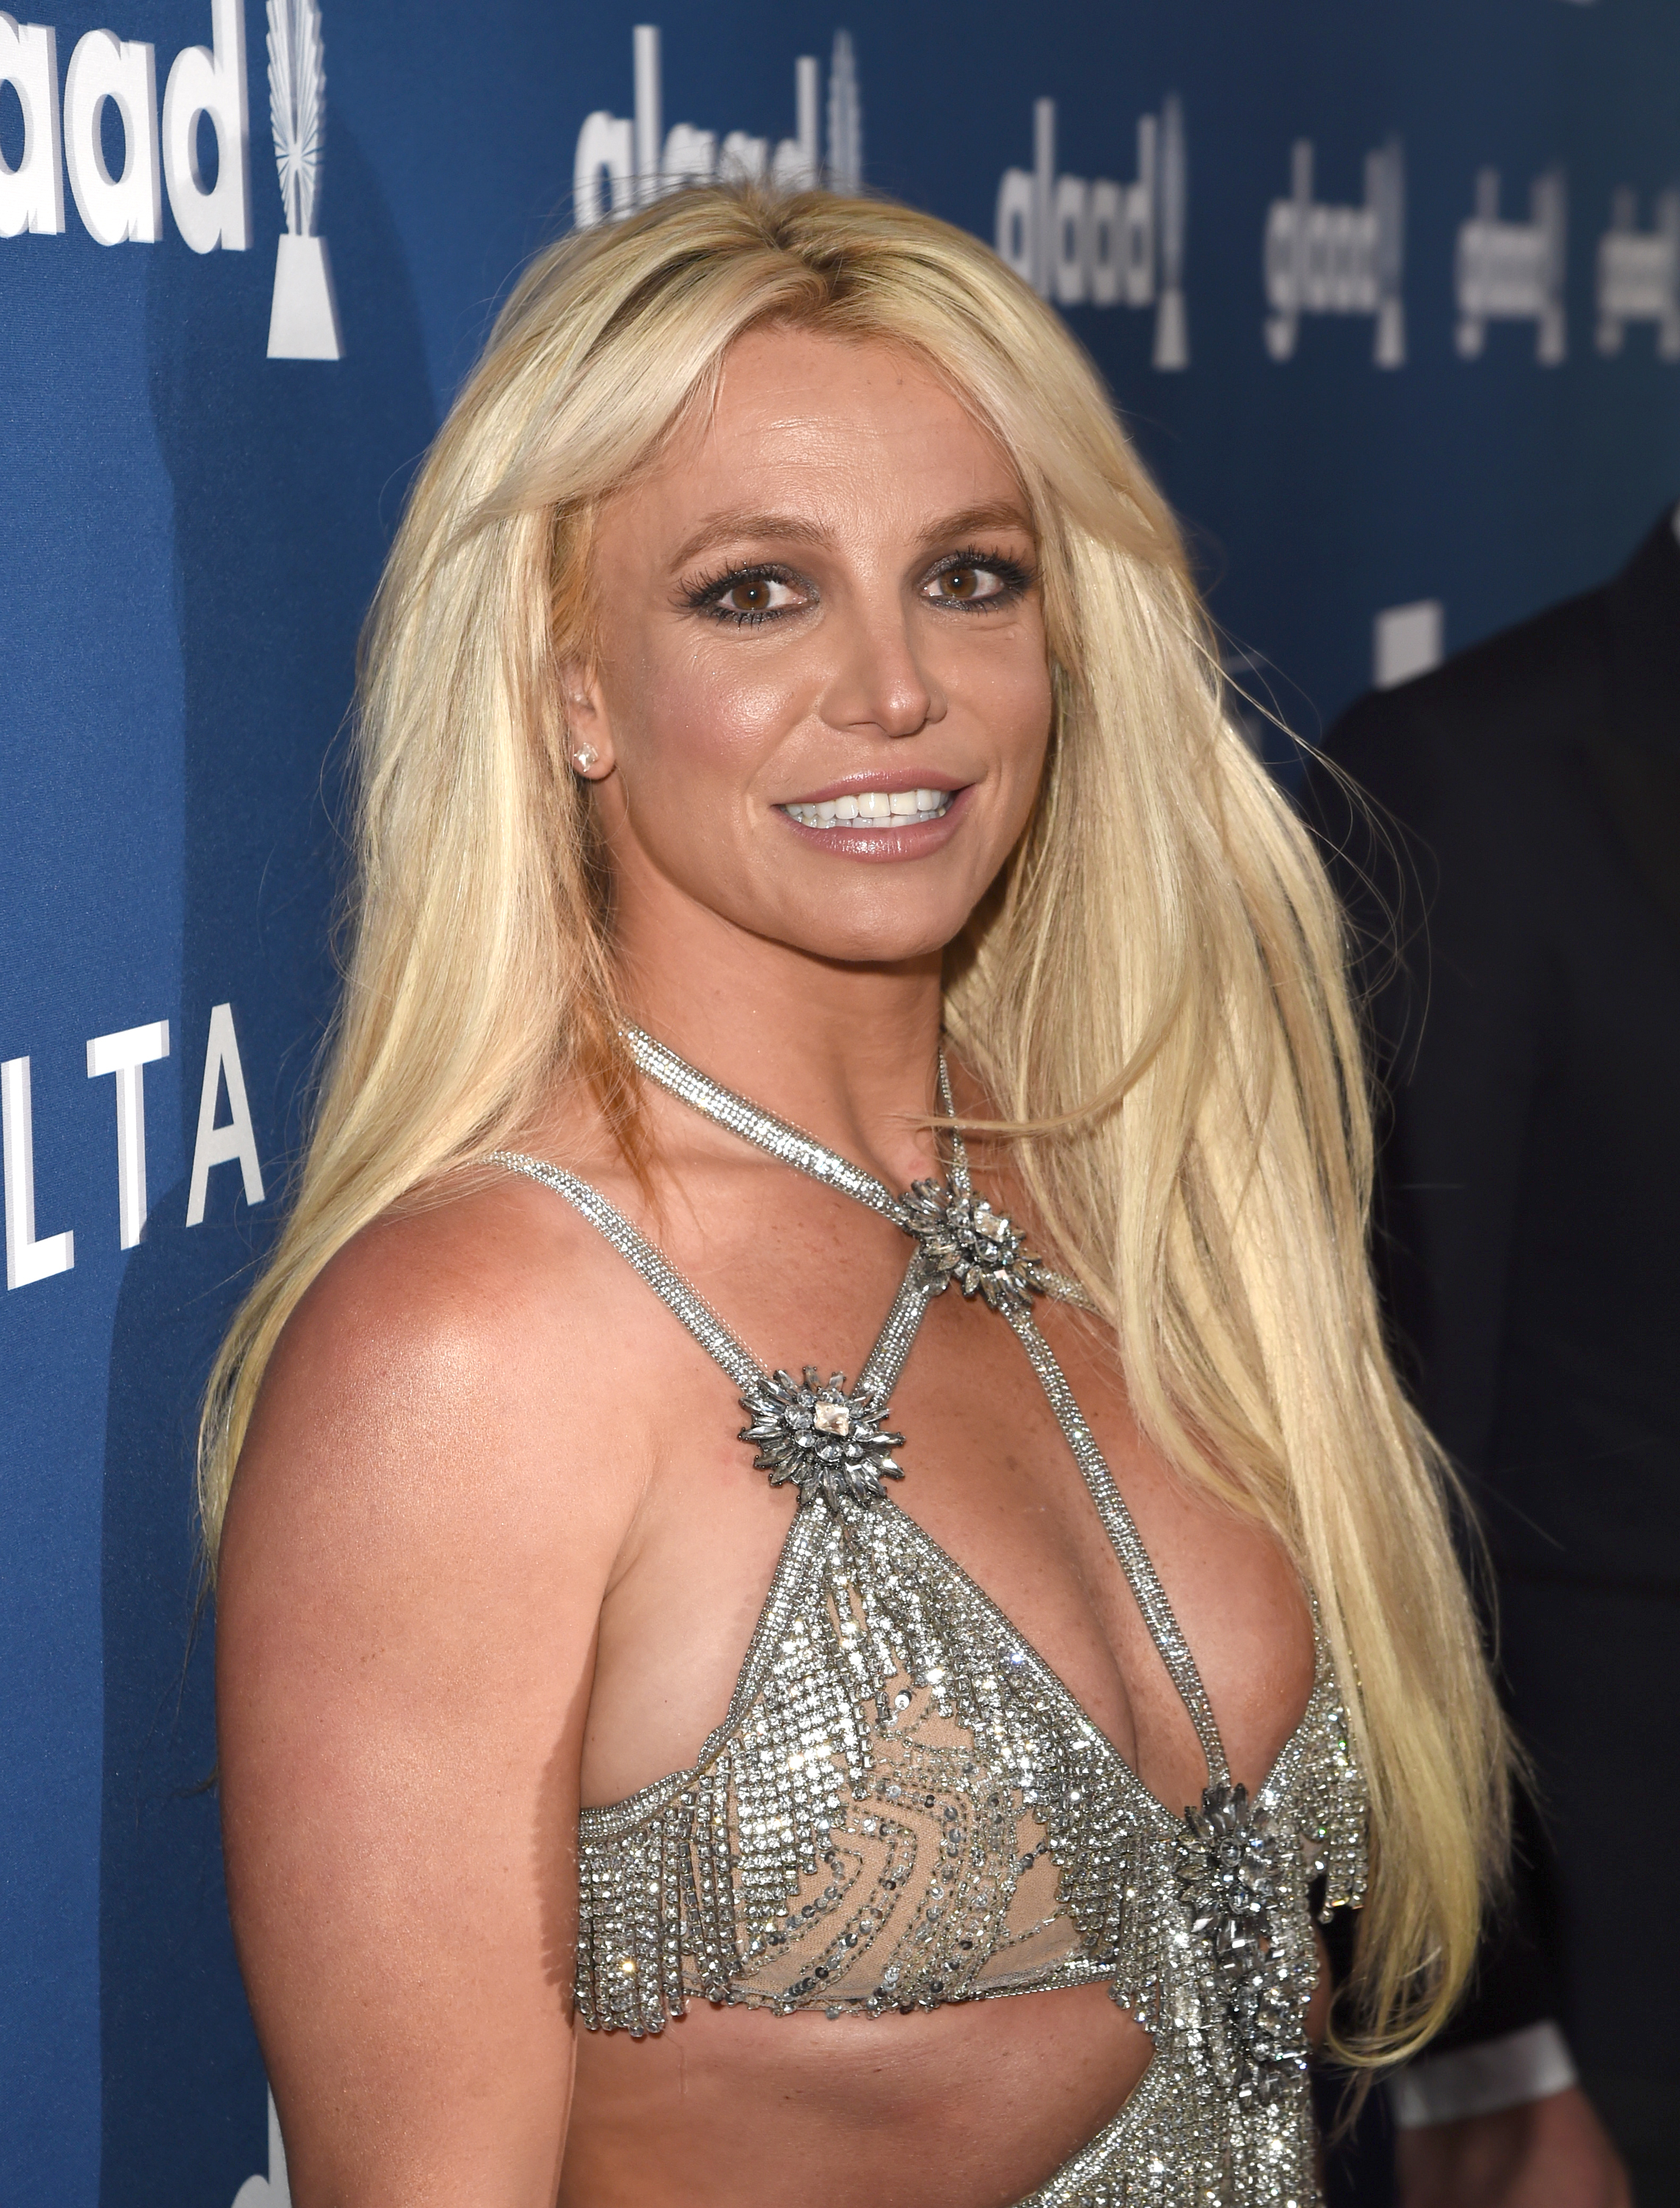 Close-up of Britney smililng at a media event and wearing a sparkly cutout outfit